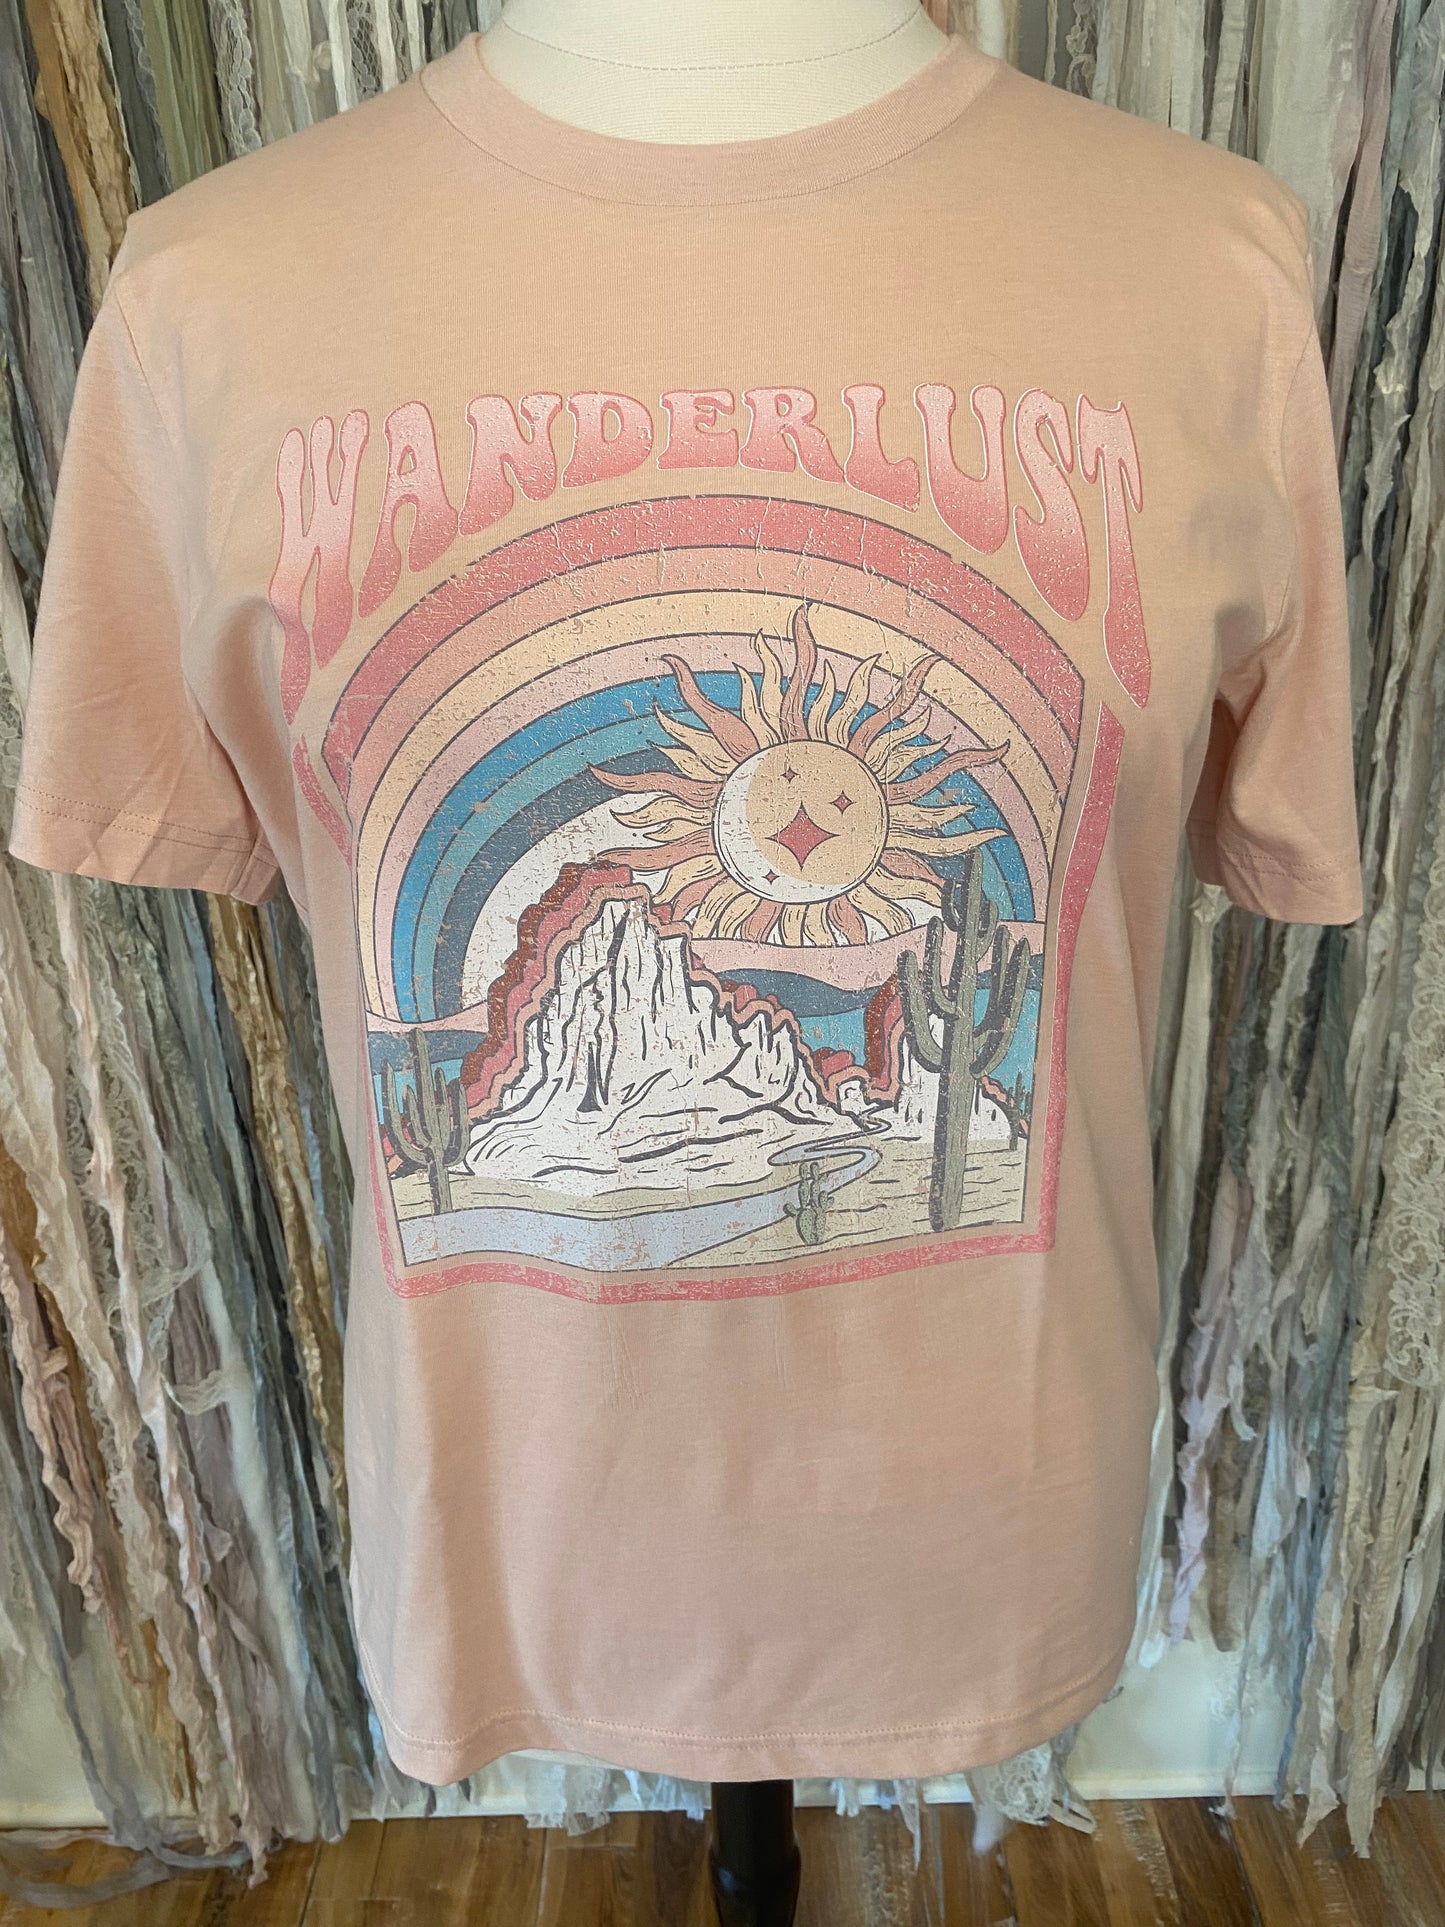 Made To Order Line - T-Shirt with Wanderlust Written on it